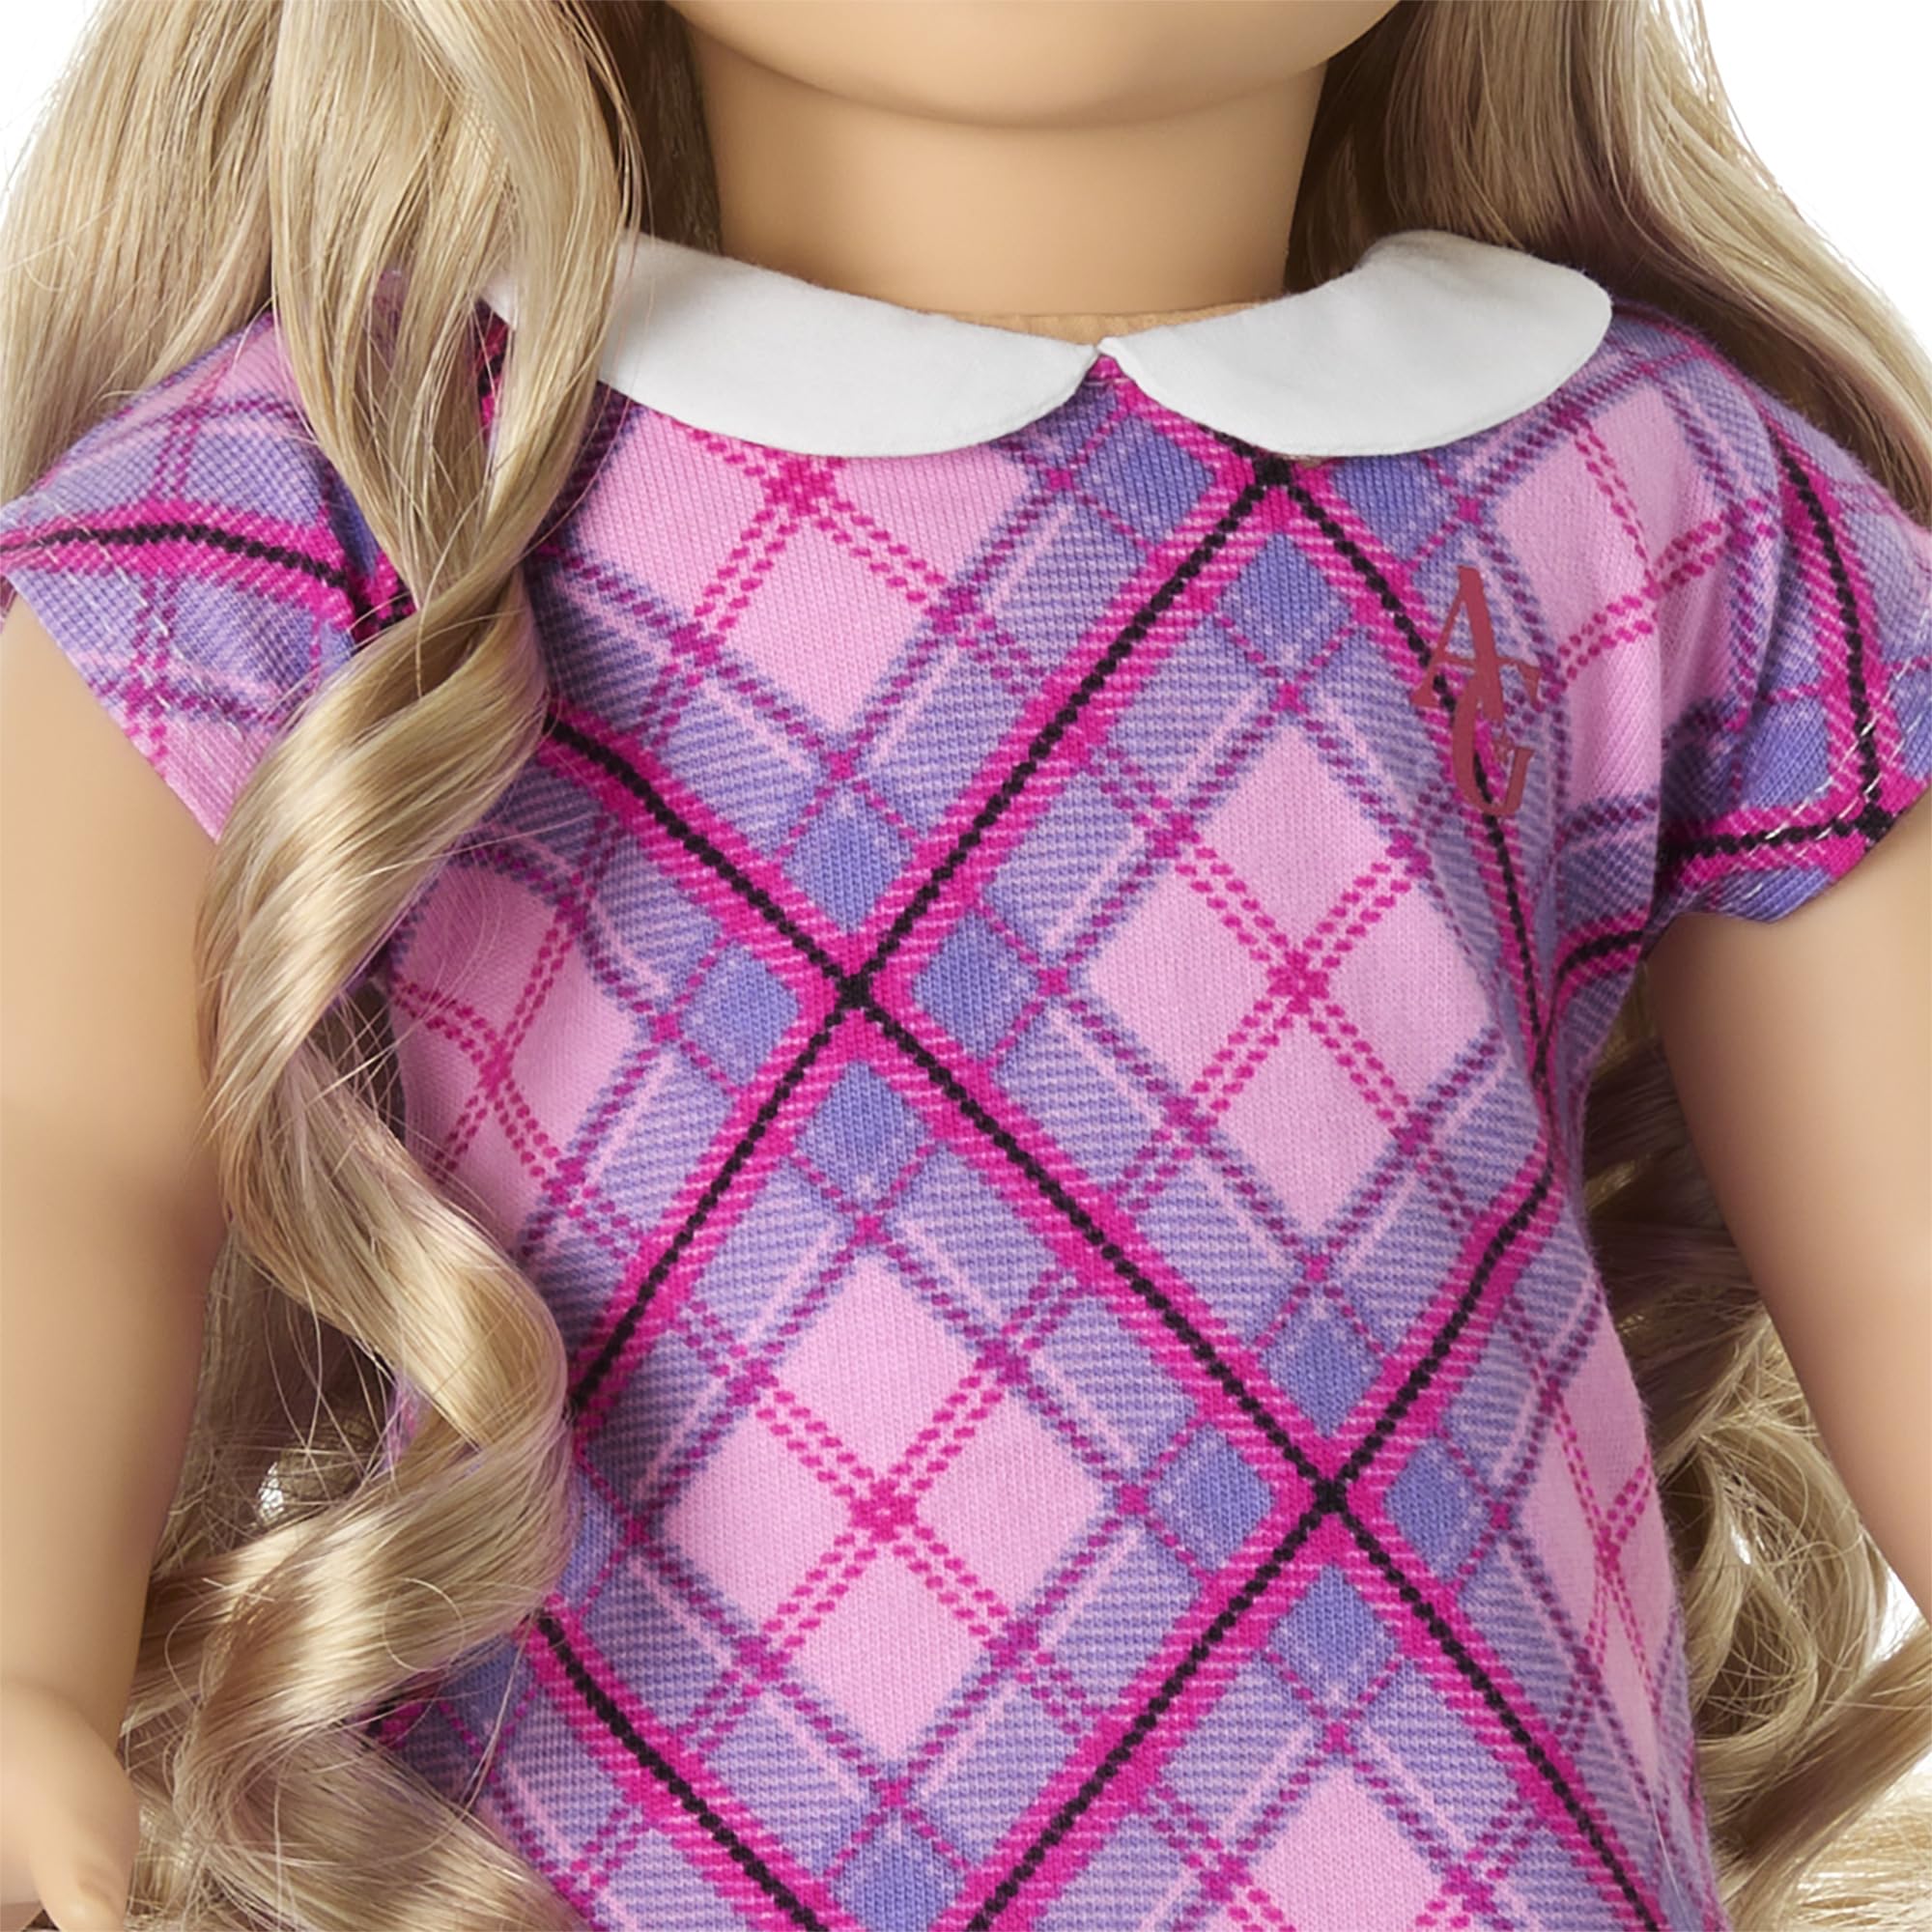 American Girl Truly Me 18-inch Doll #125 with Hazel Eyes, Curly Blonde Hair, Light Skin w/Warm Olive Undertones, for Ages 6+